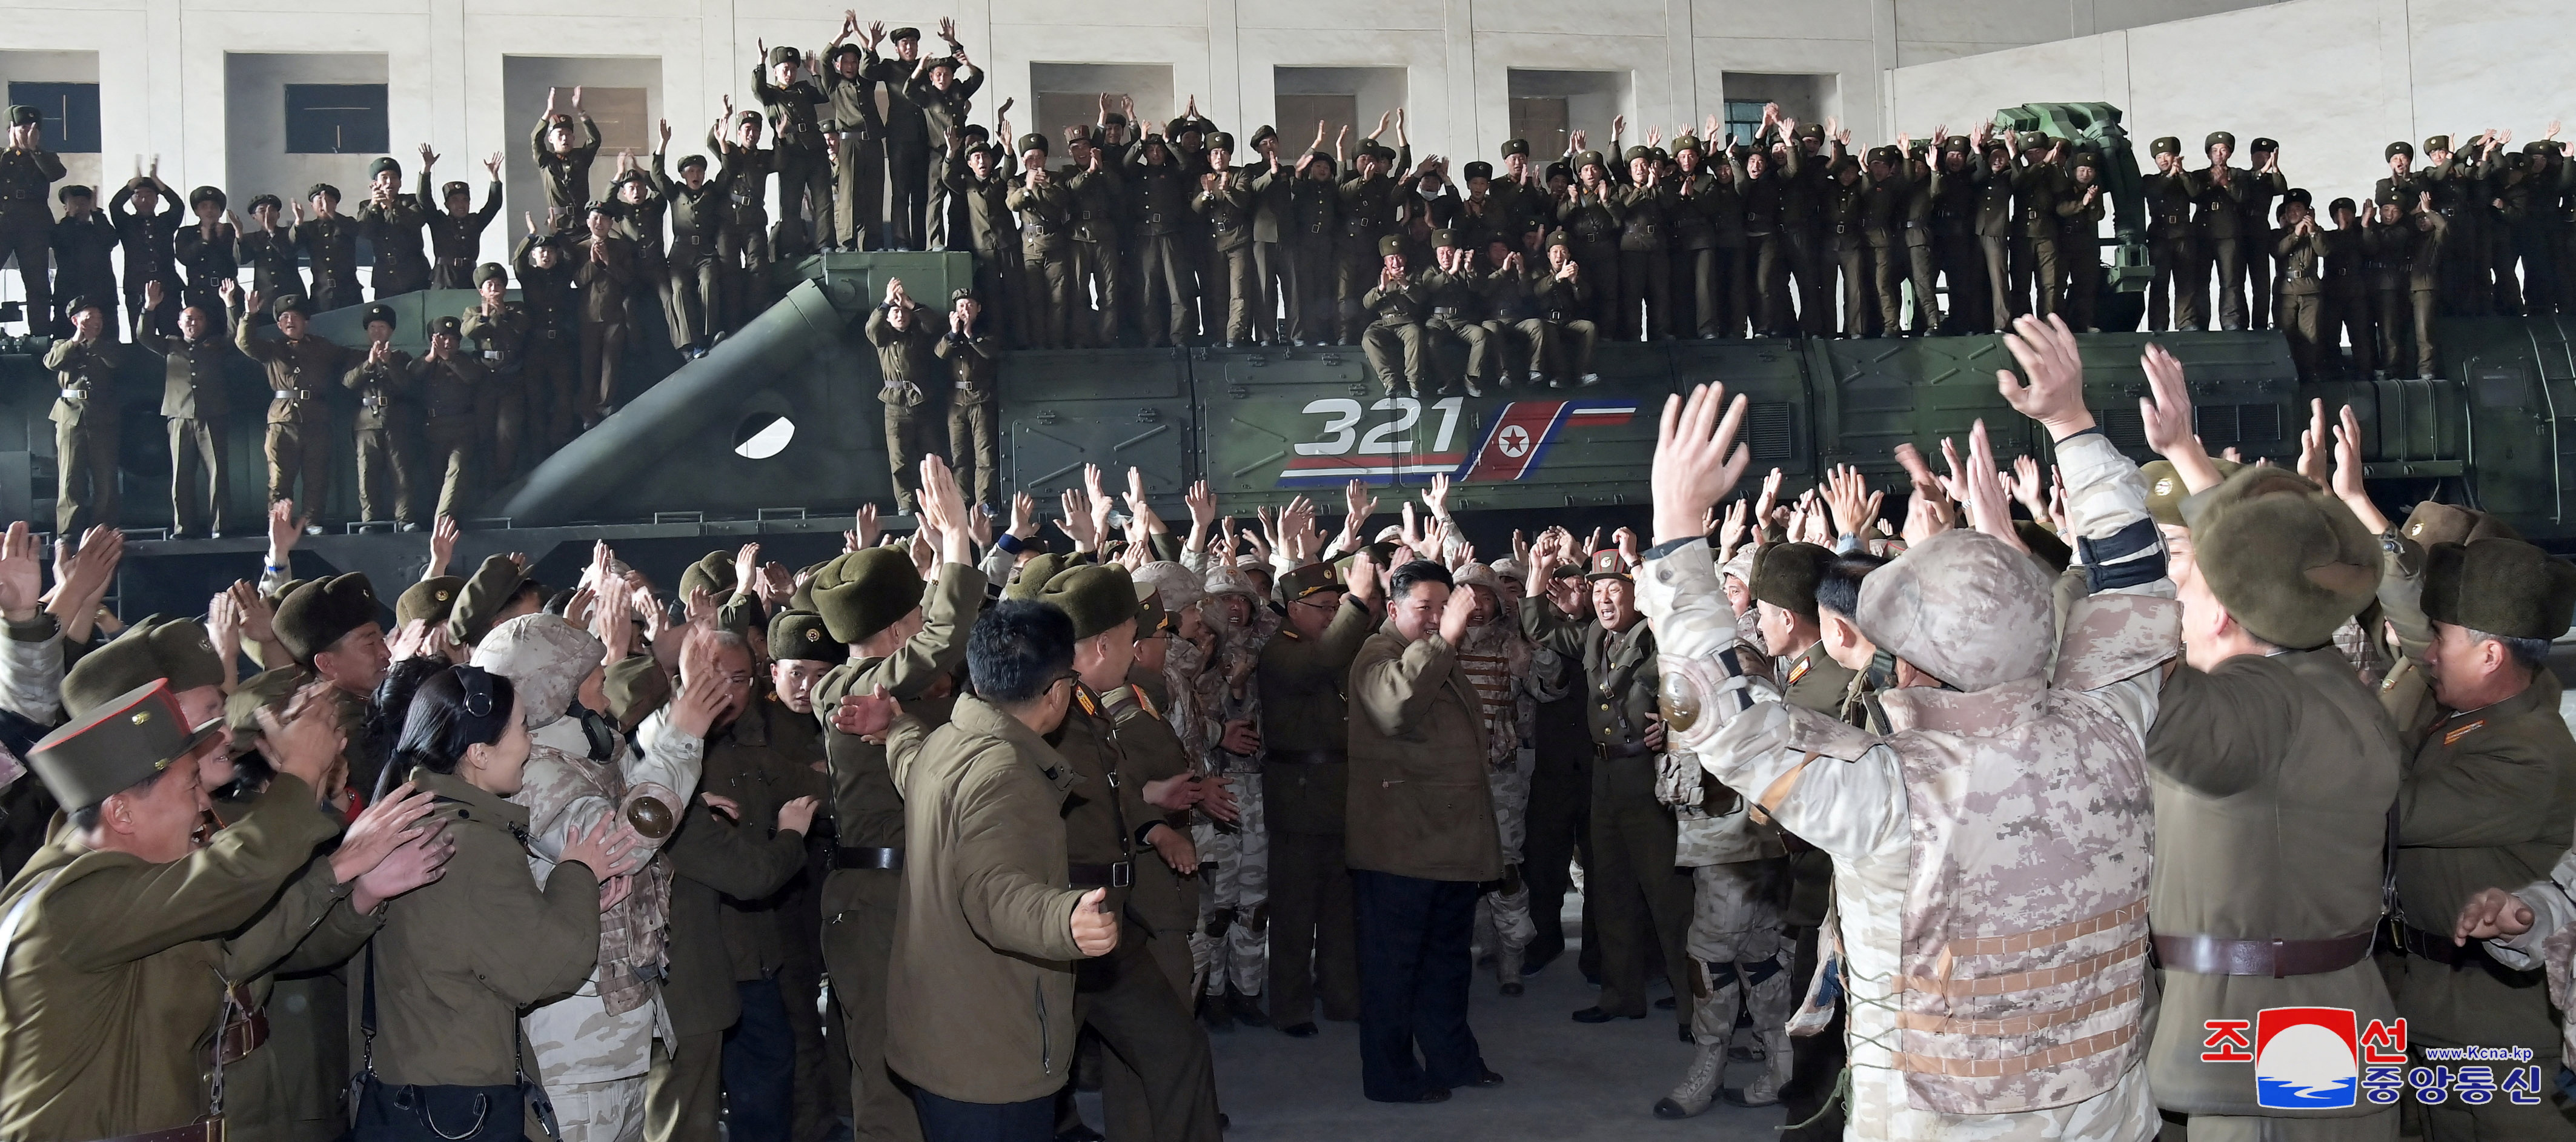 North Korean leader Kim Jong Un celebrates on the day of the launch of an ICBM in this undated photo released by KCNA